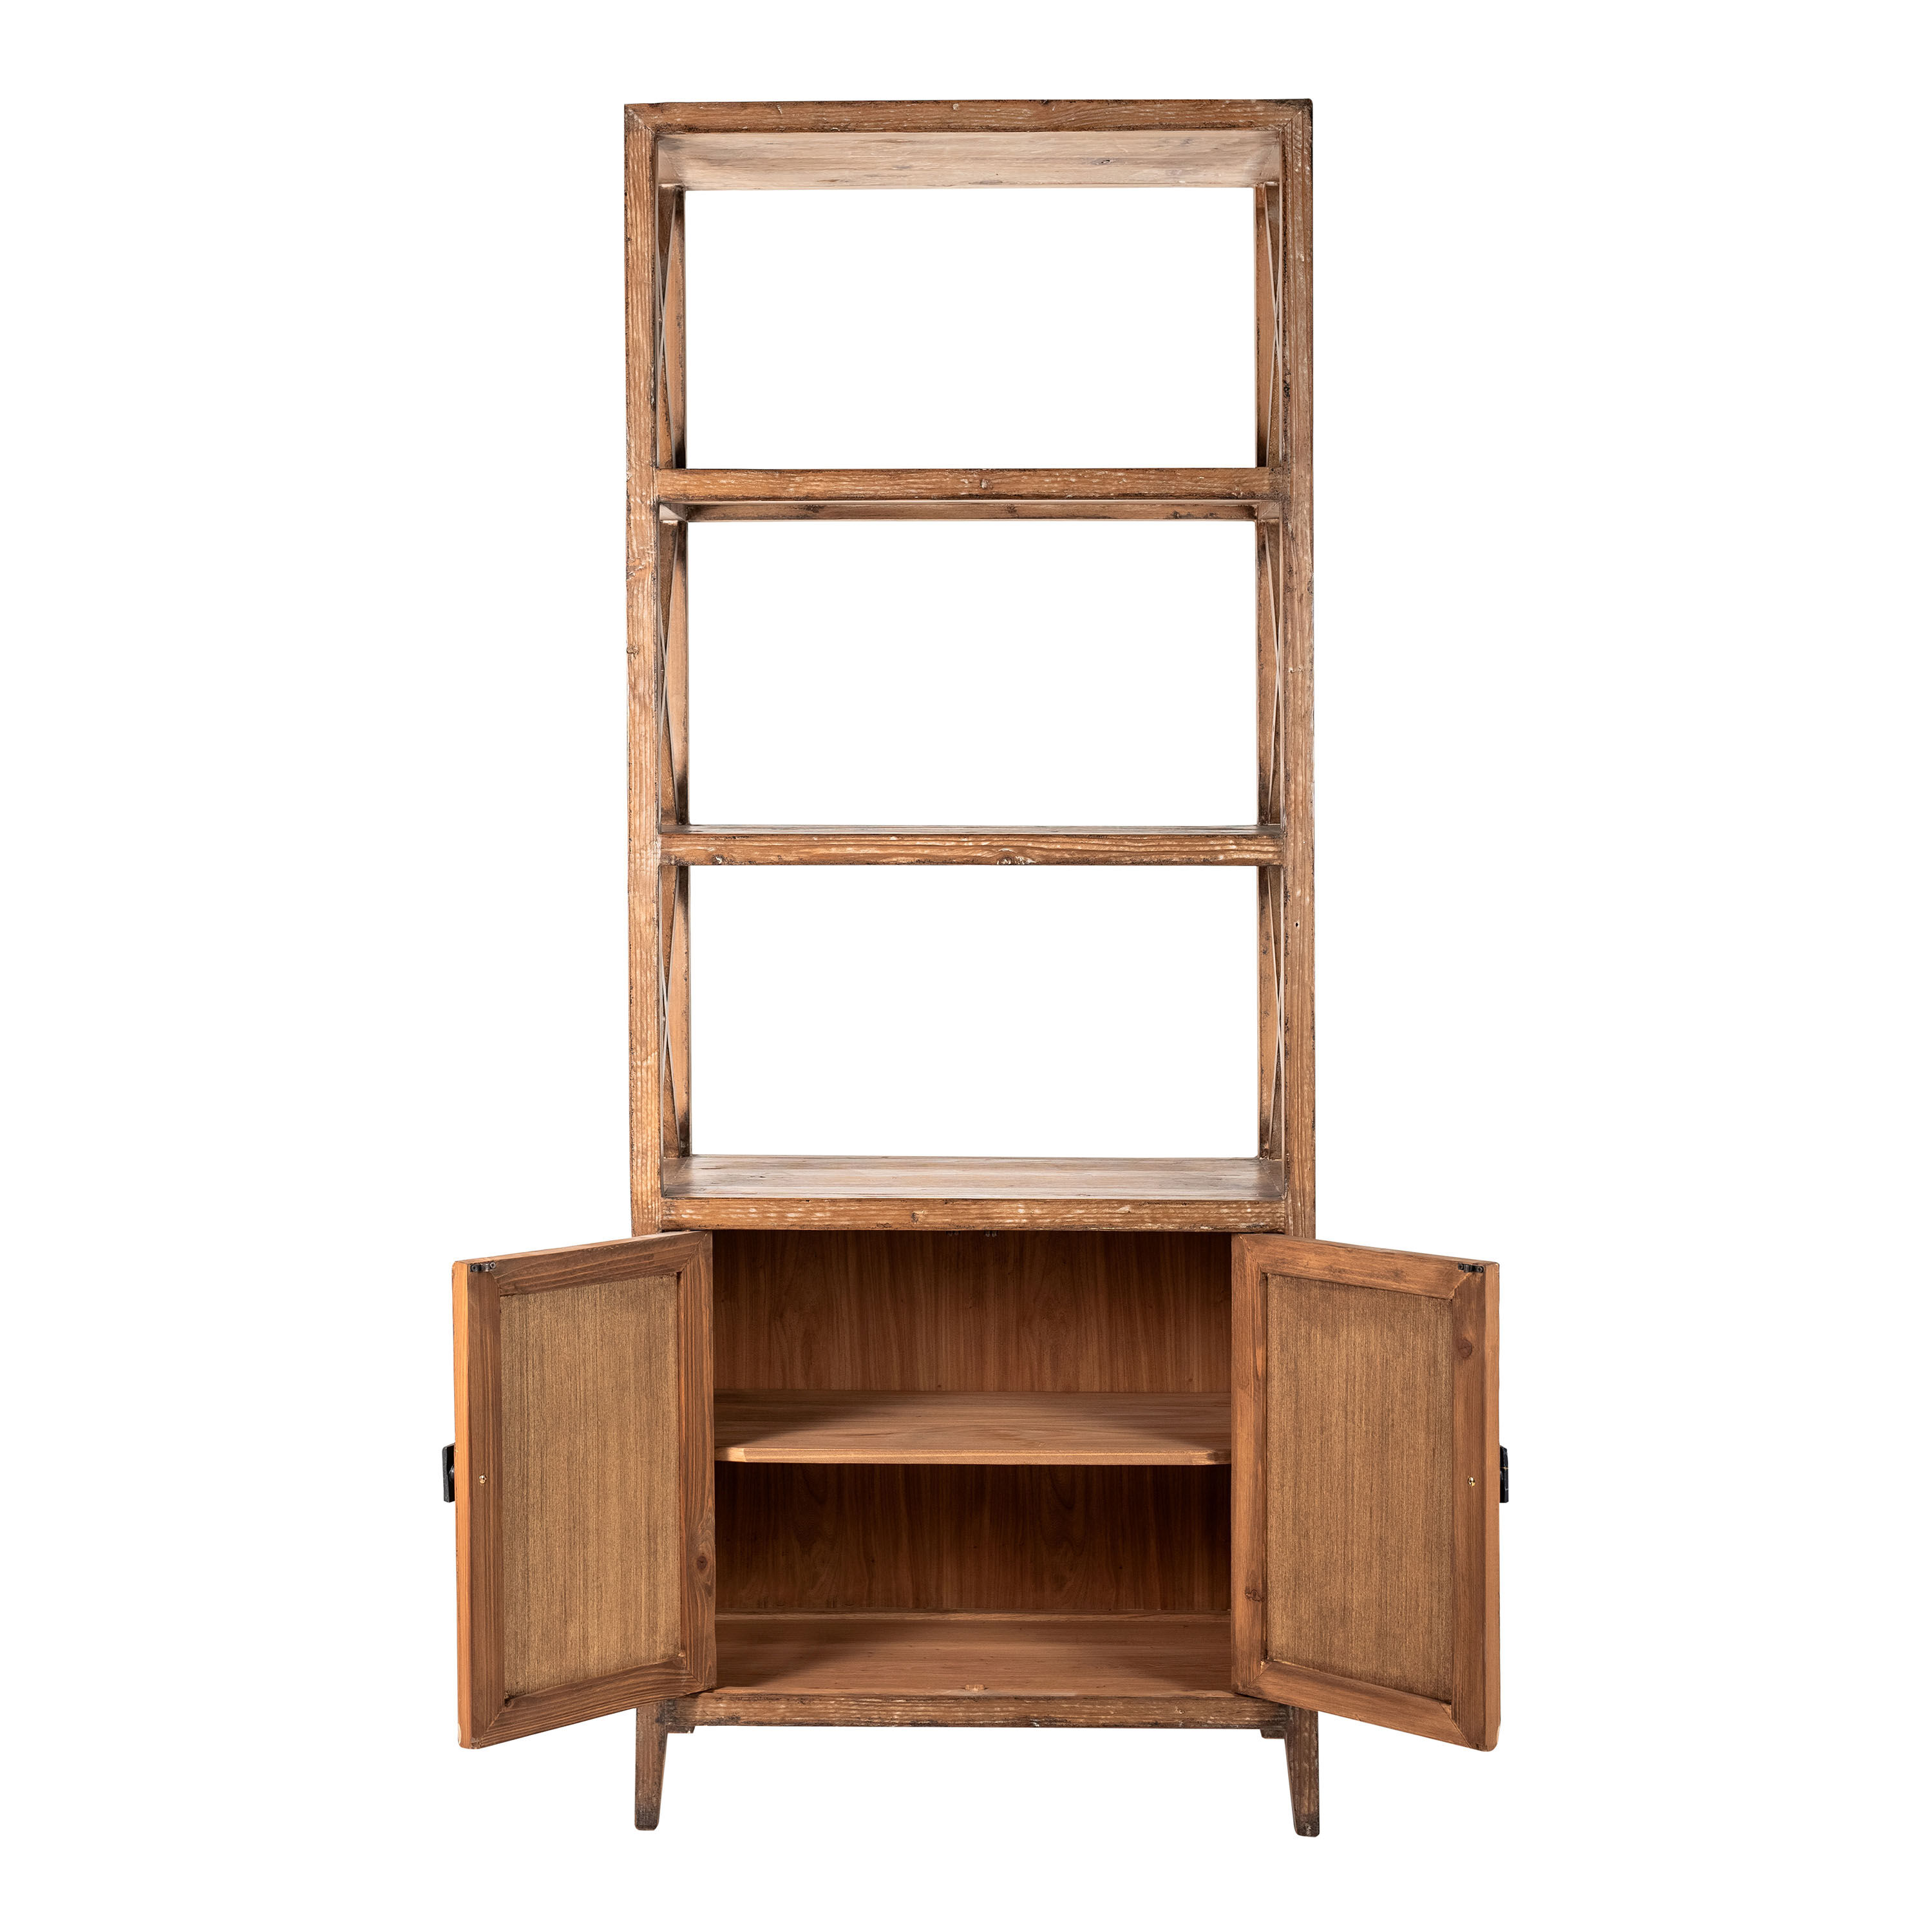 Averill Reclaimed Pine And Cane Bookshelf With Cabinet